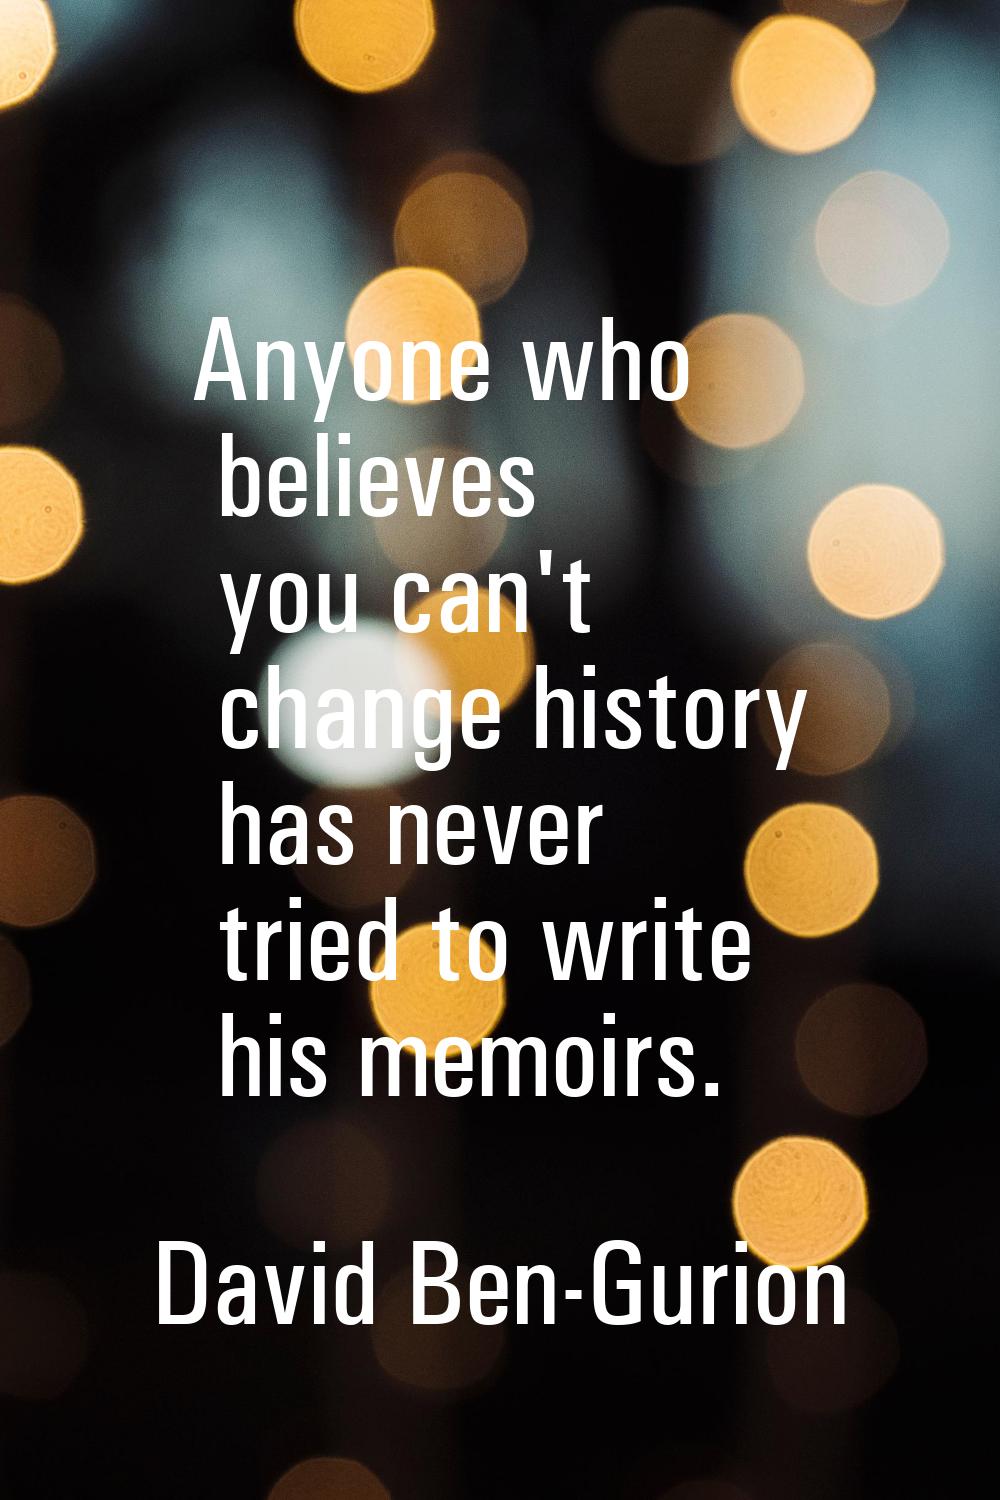 Anyone who believes you can't change history has never tried to write his memoirs.